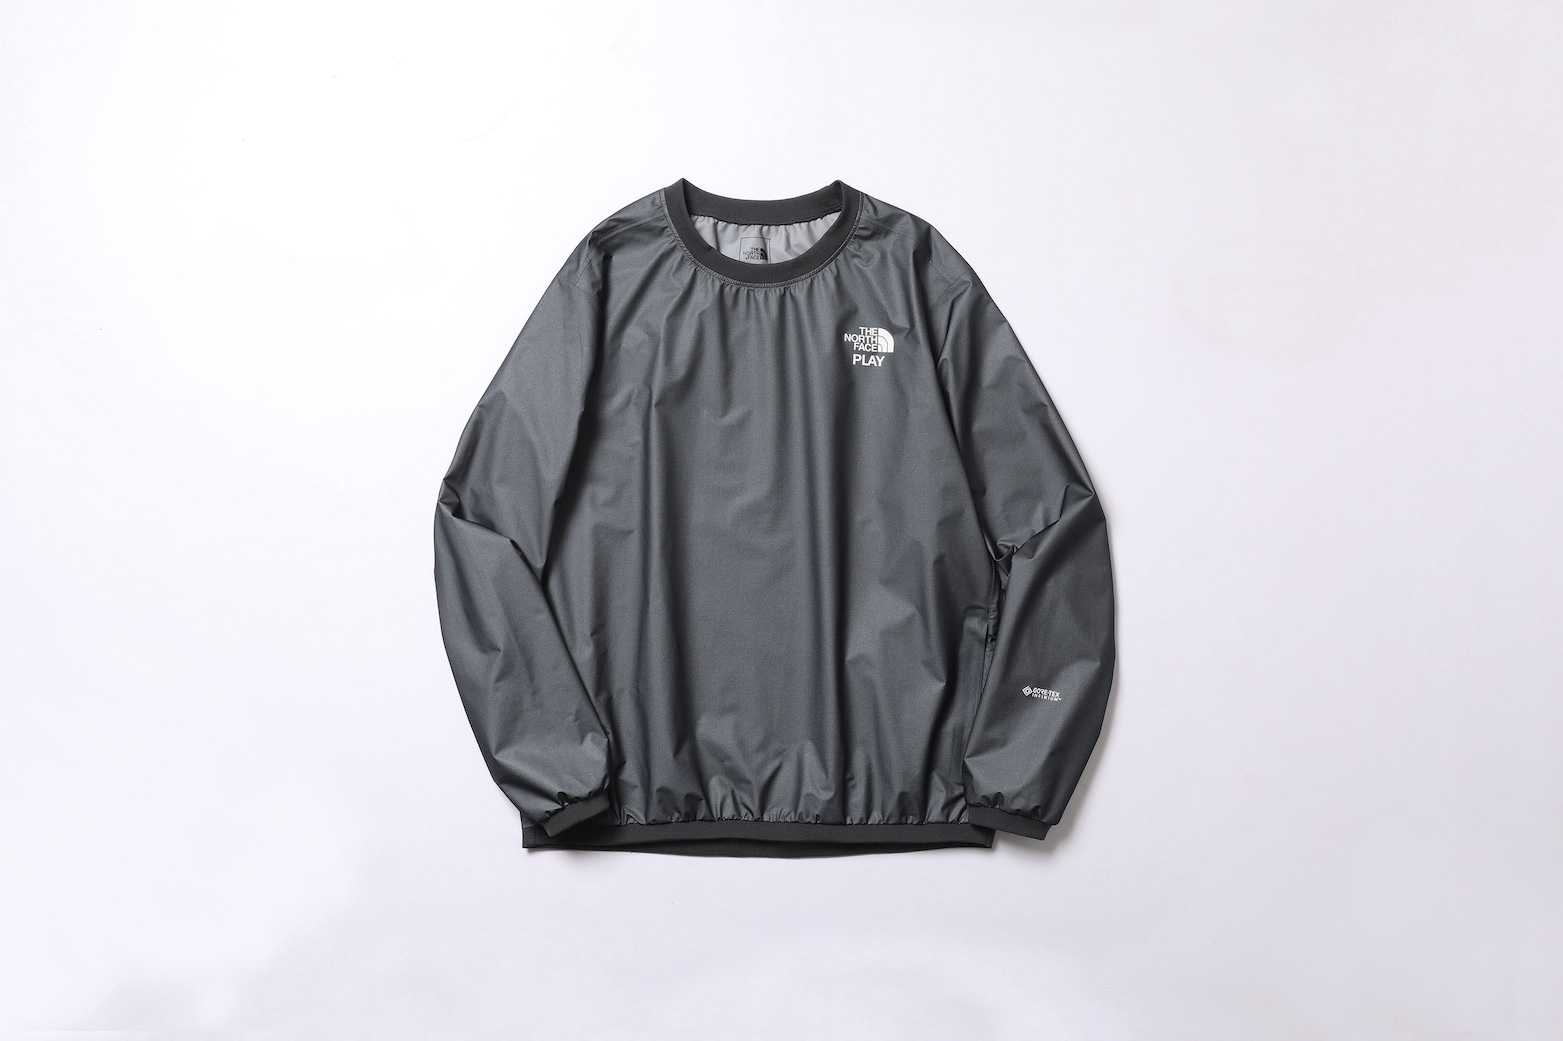 THE NORTH FACE PLAY限定新作コレクション